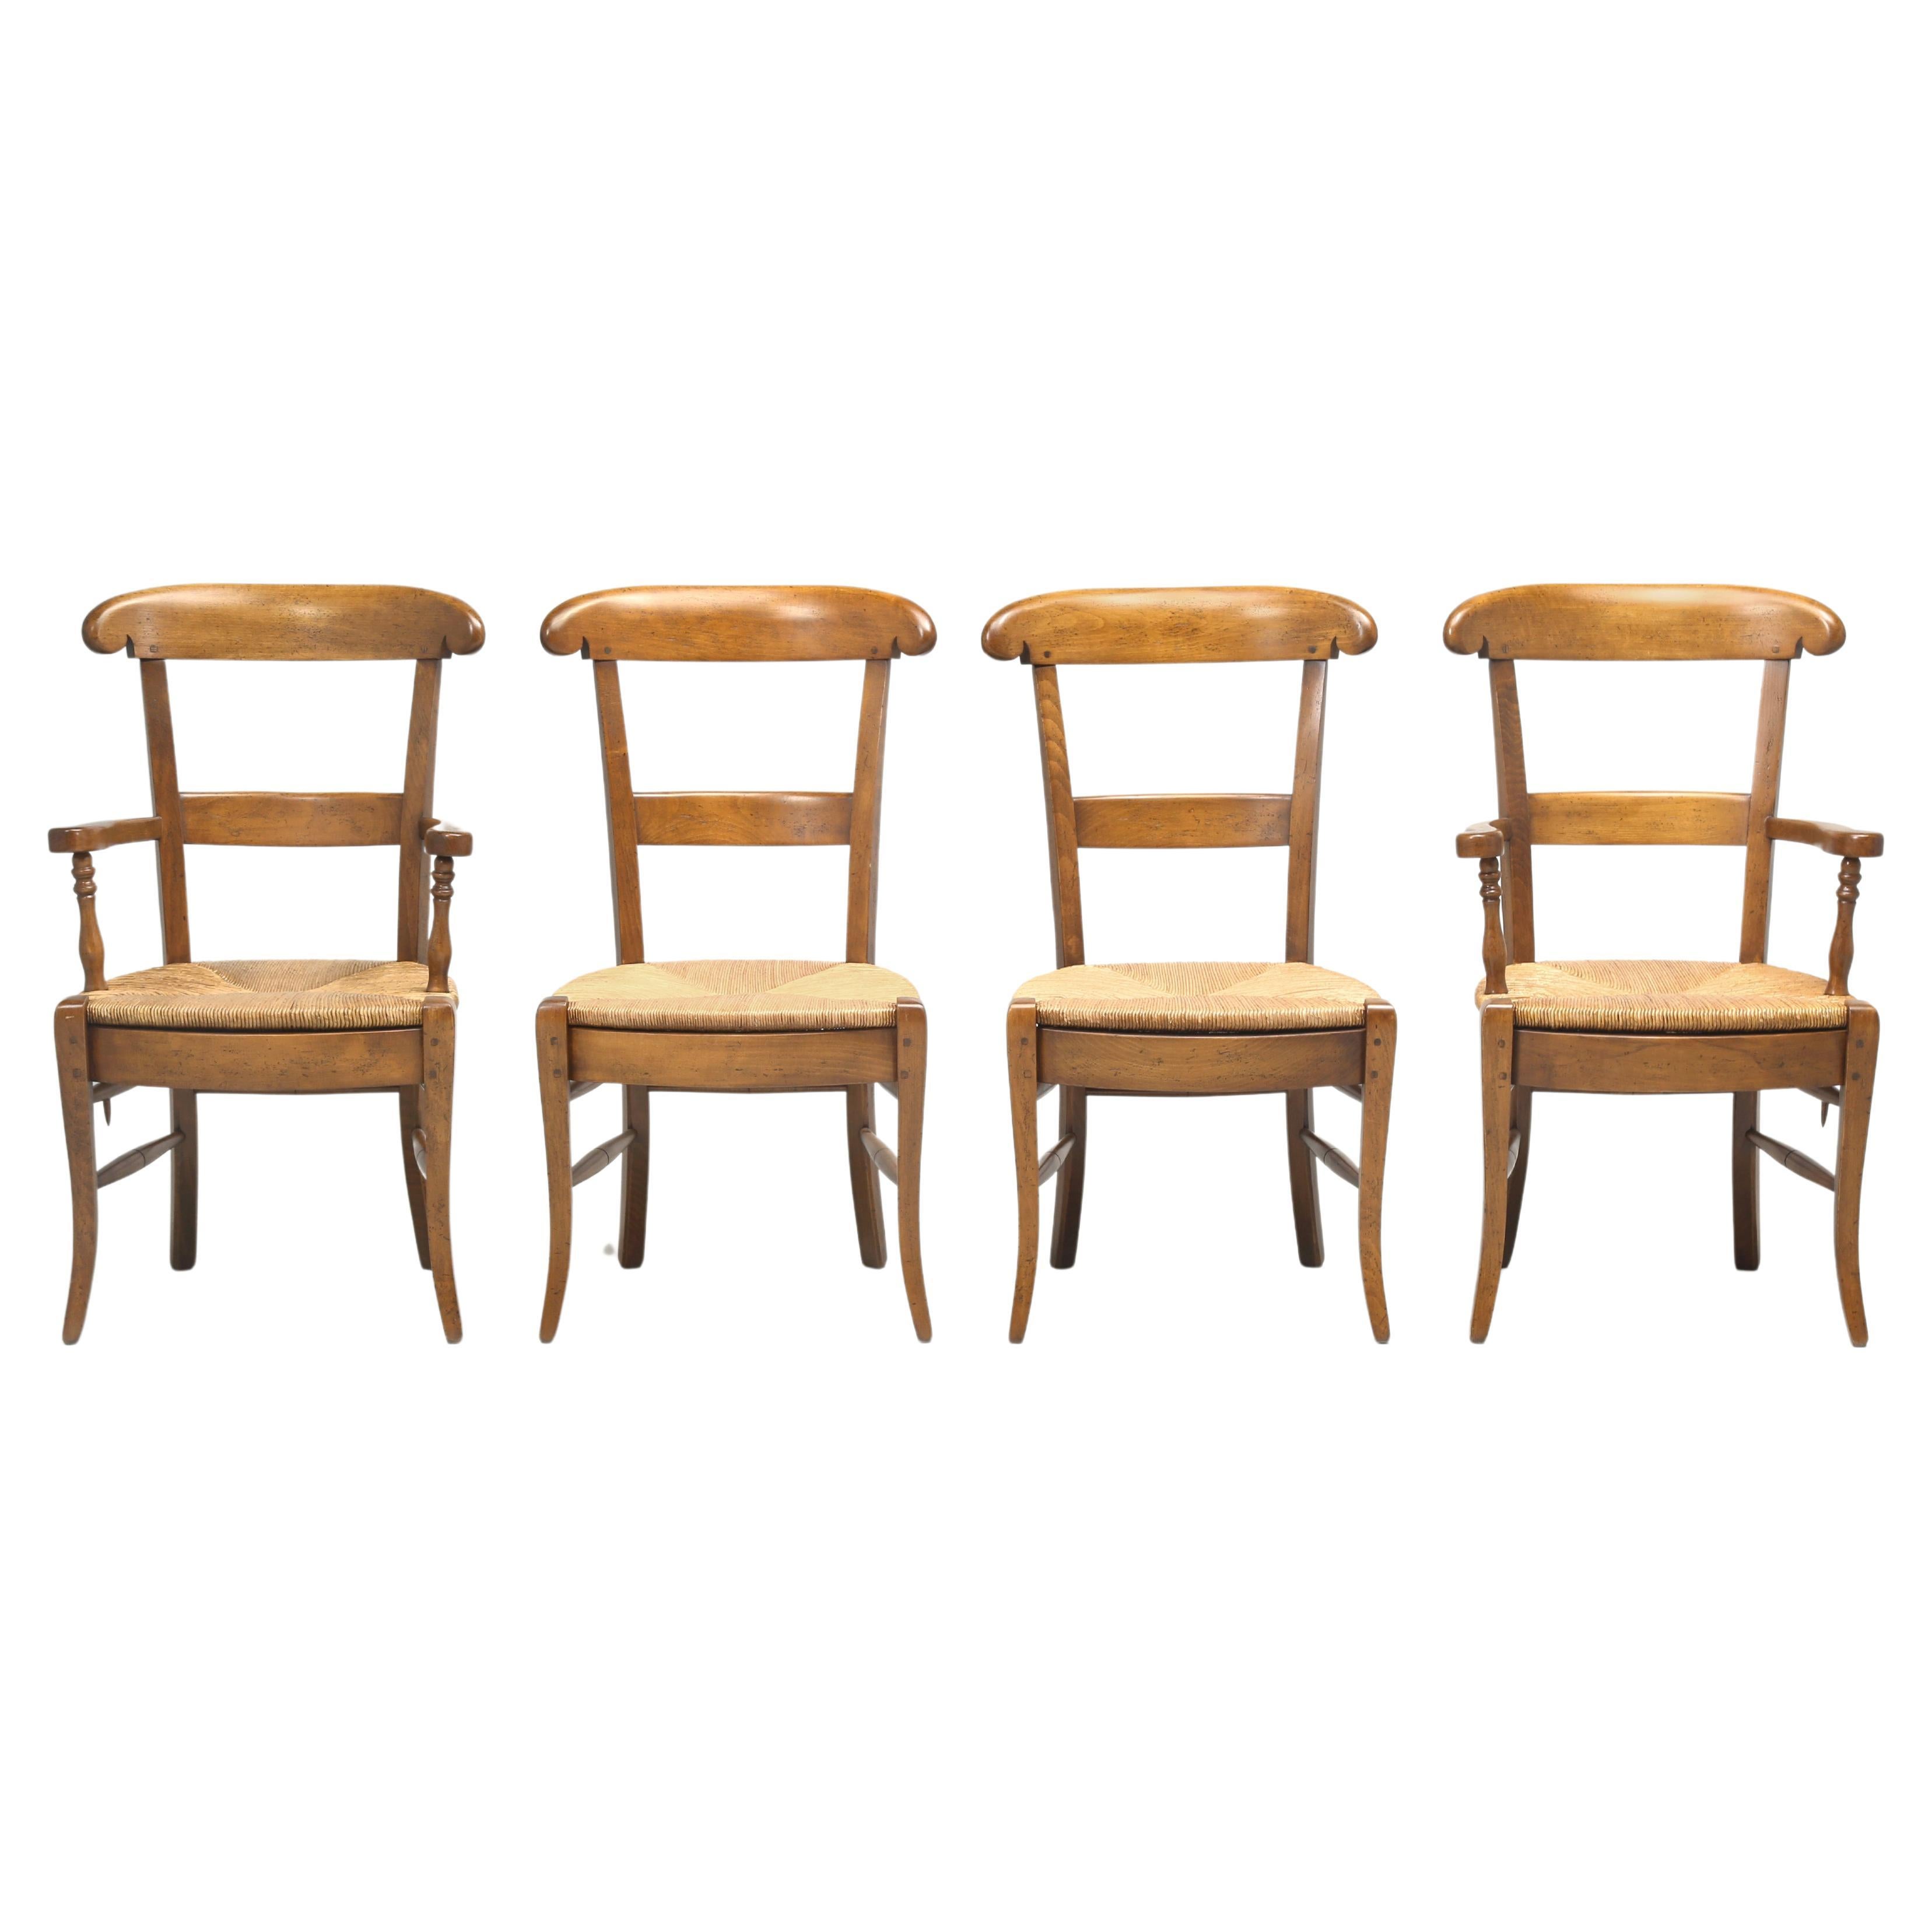 Country French Dining Chairs Hand-Made by the  Lacroix Family since 1856 